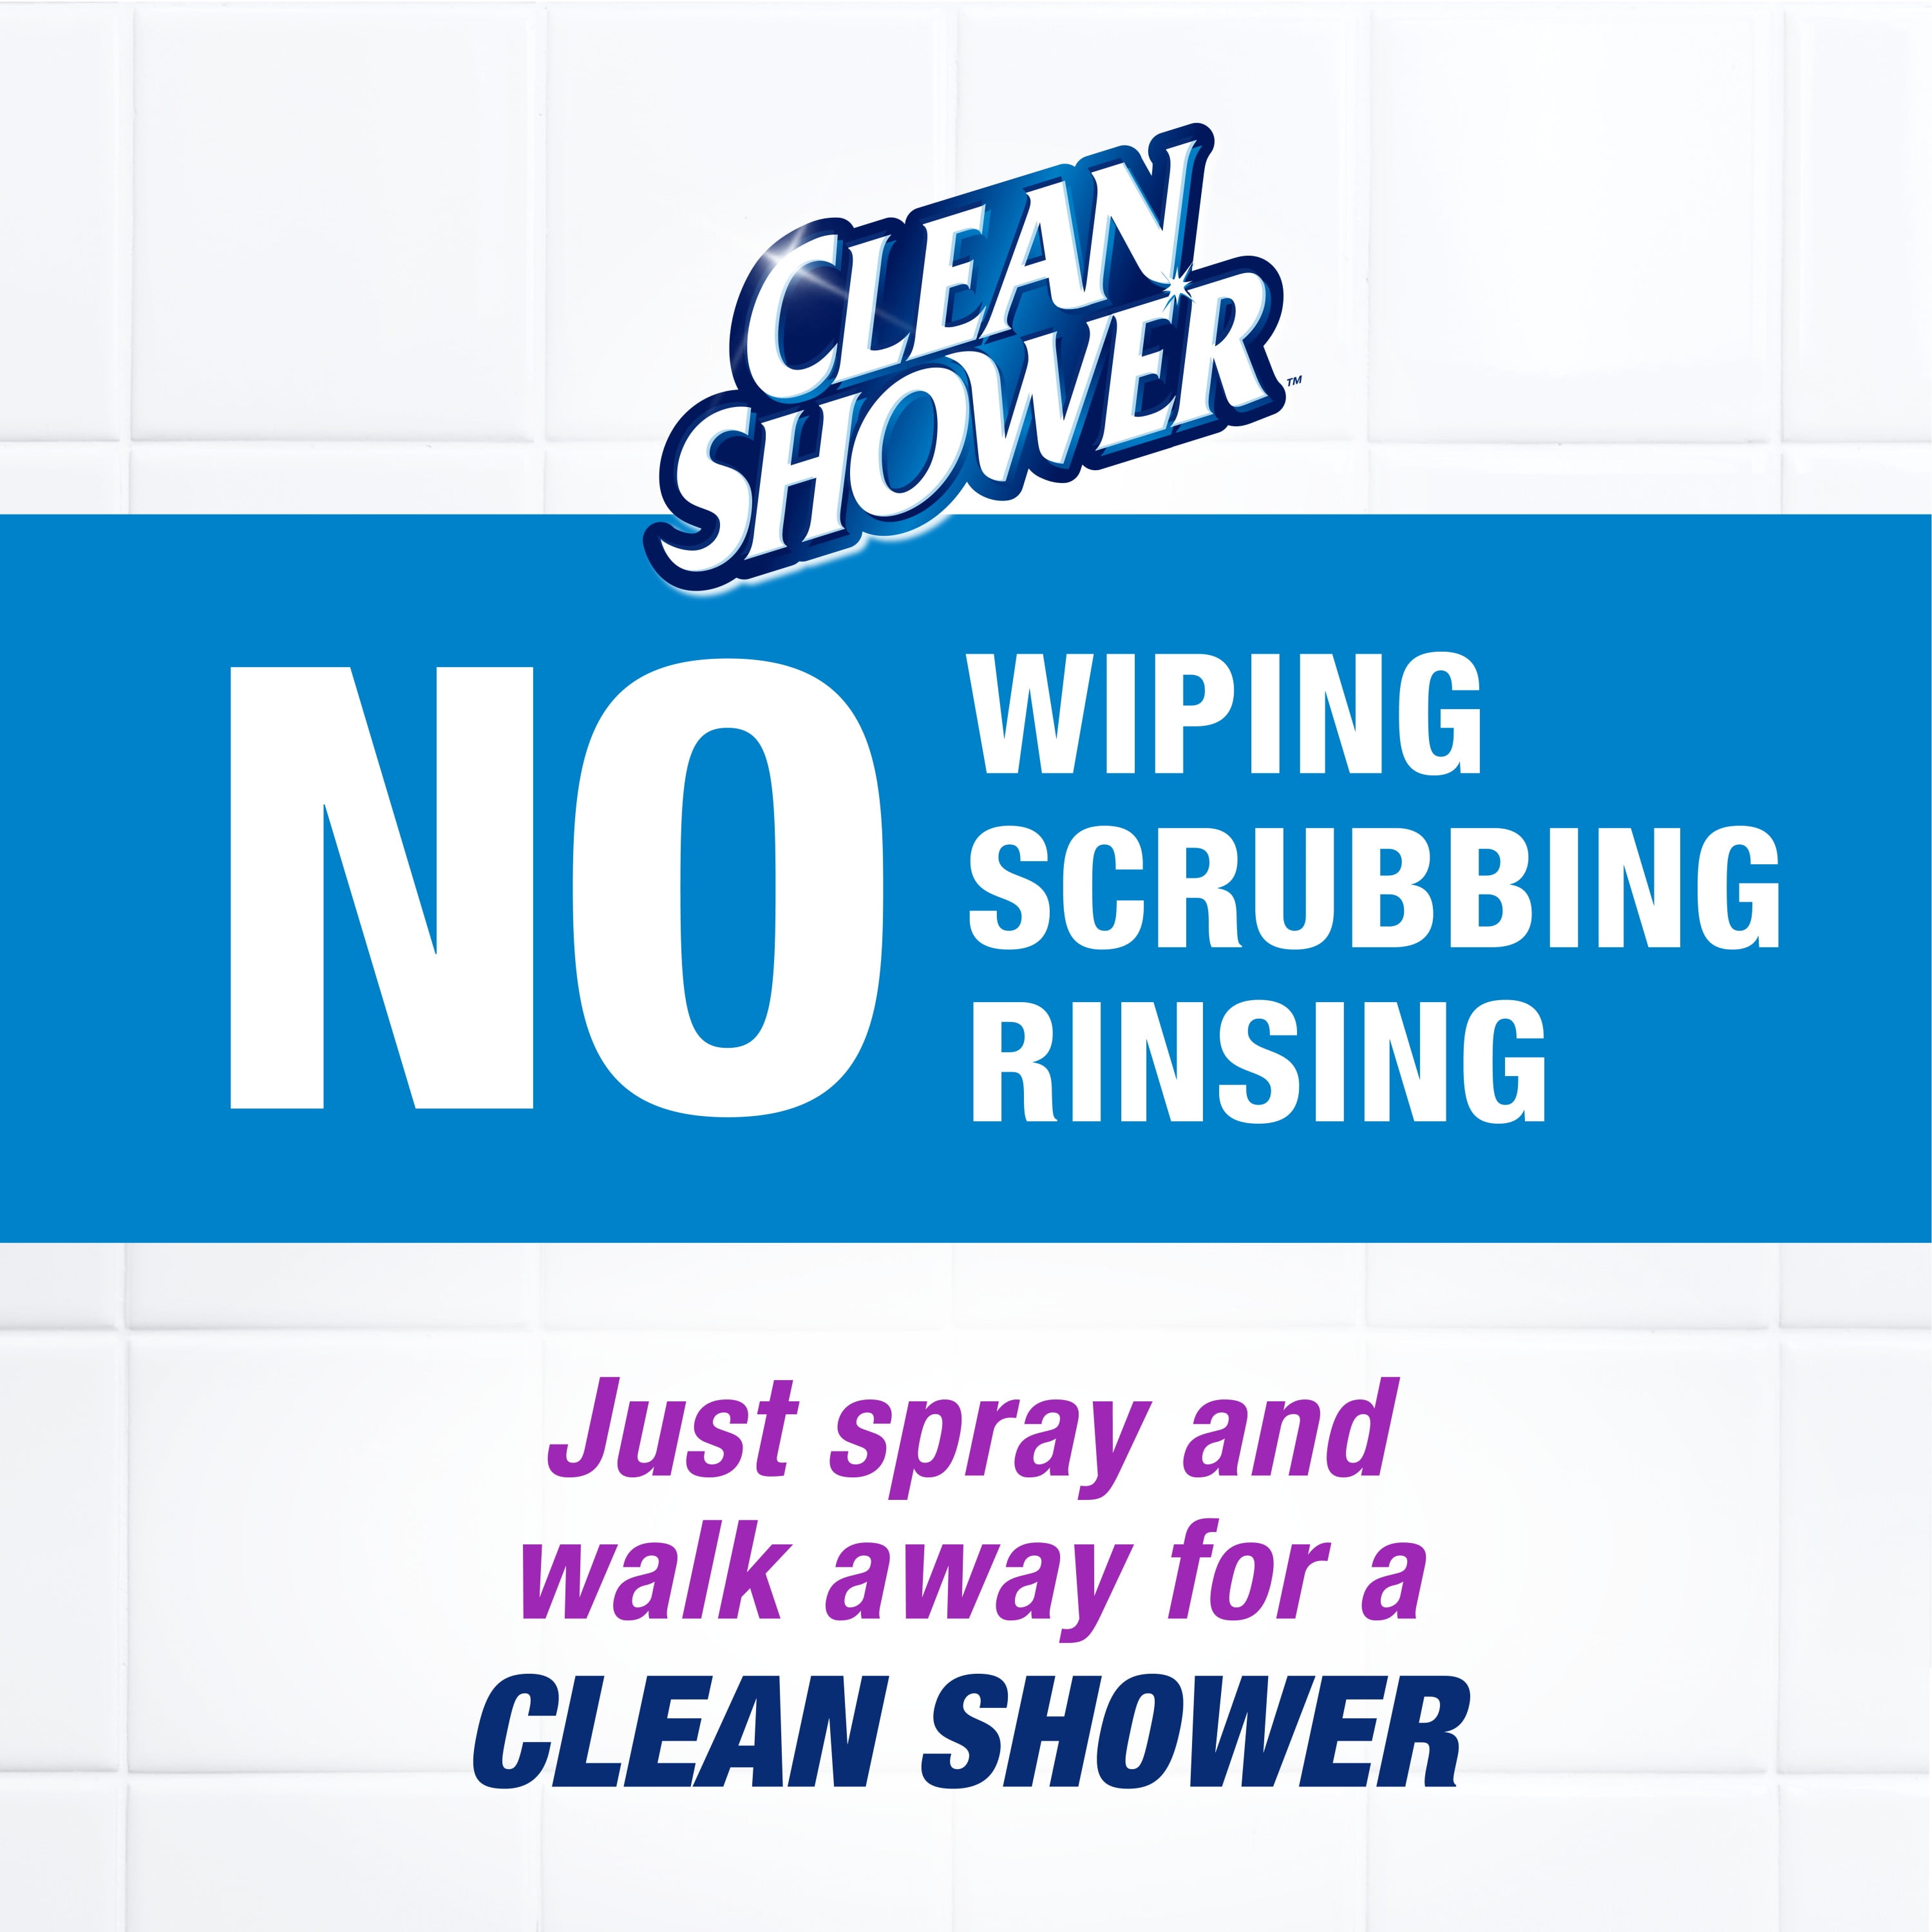 PowerHouse Daily Shower Cleaner 22 oz, Cleaning